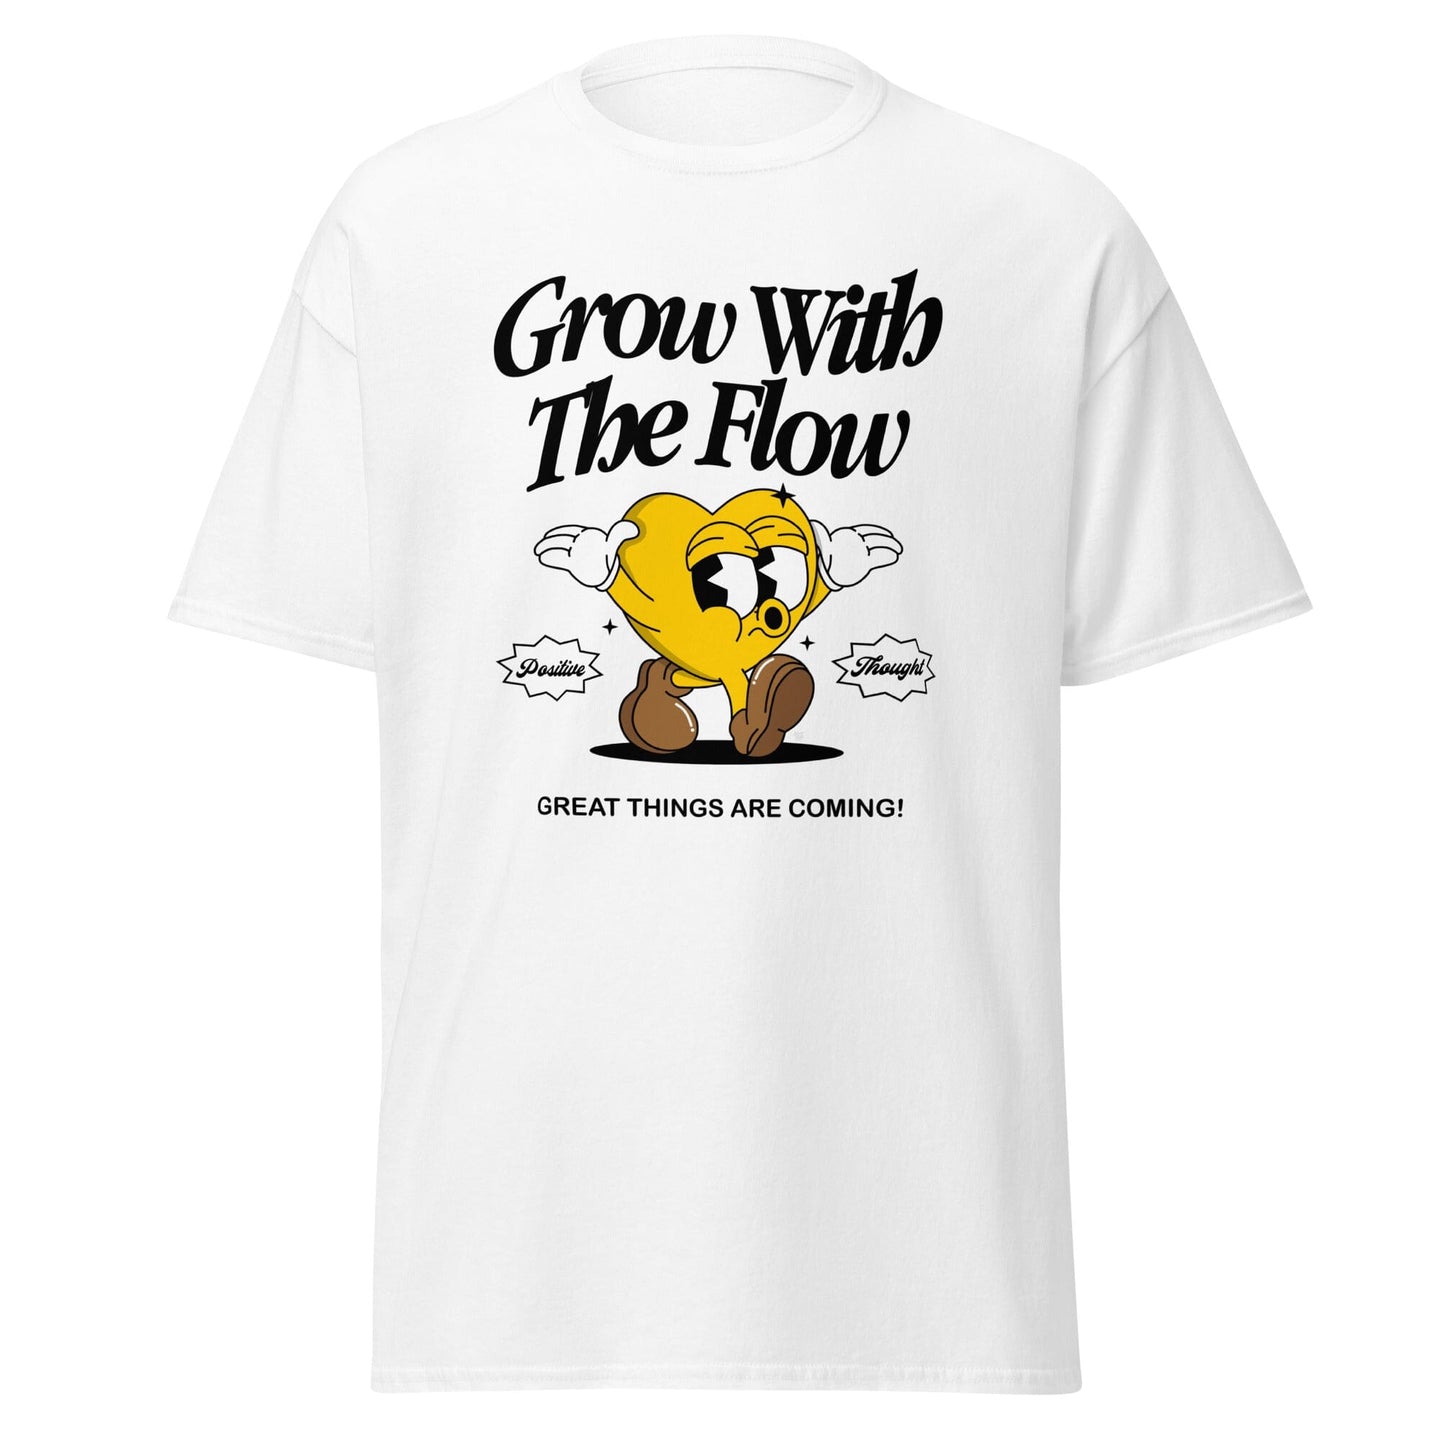 Grow with the Flow Tee by Nevin Fernaldi